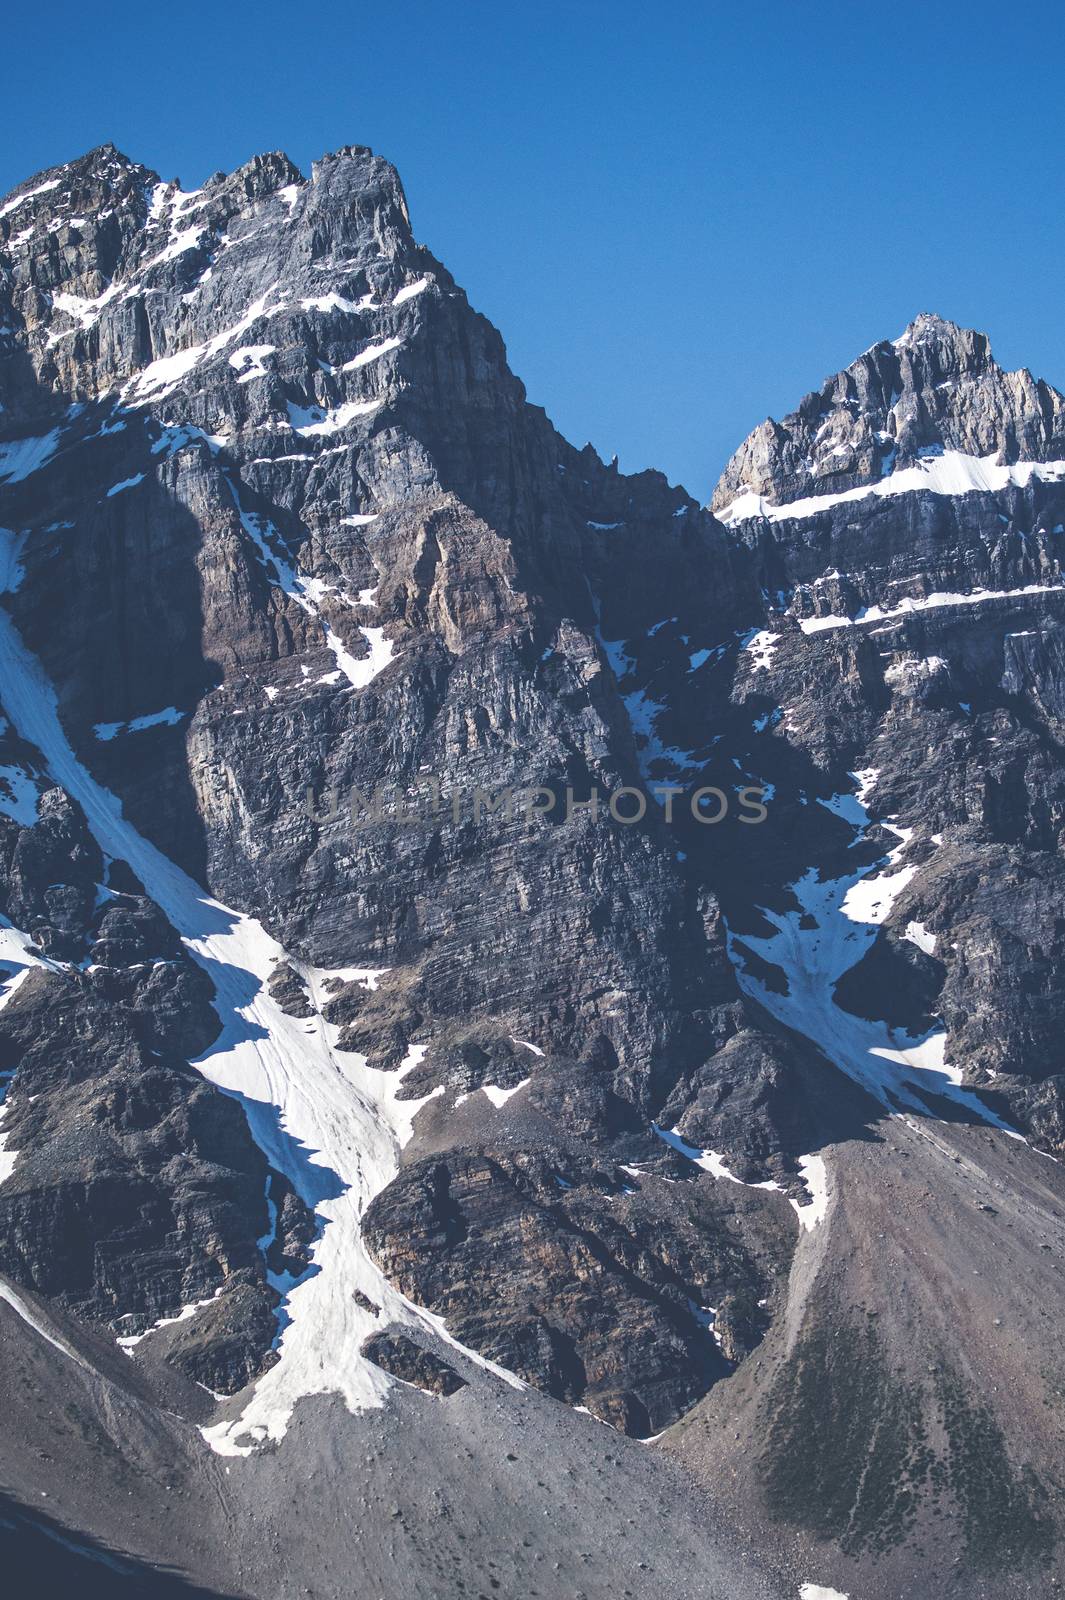 Rough mountain with cliffs and snow in blue sky